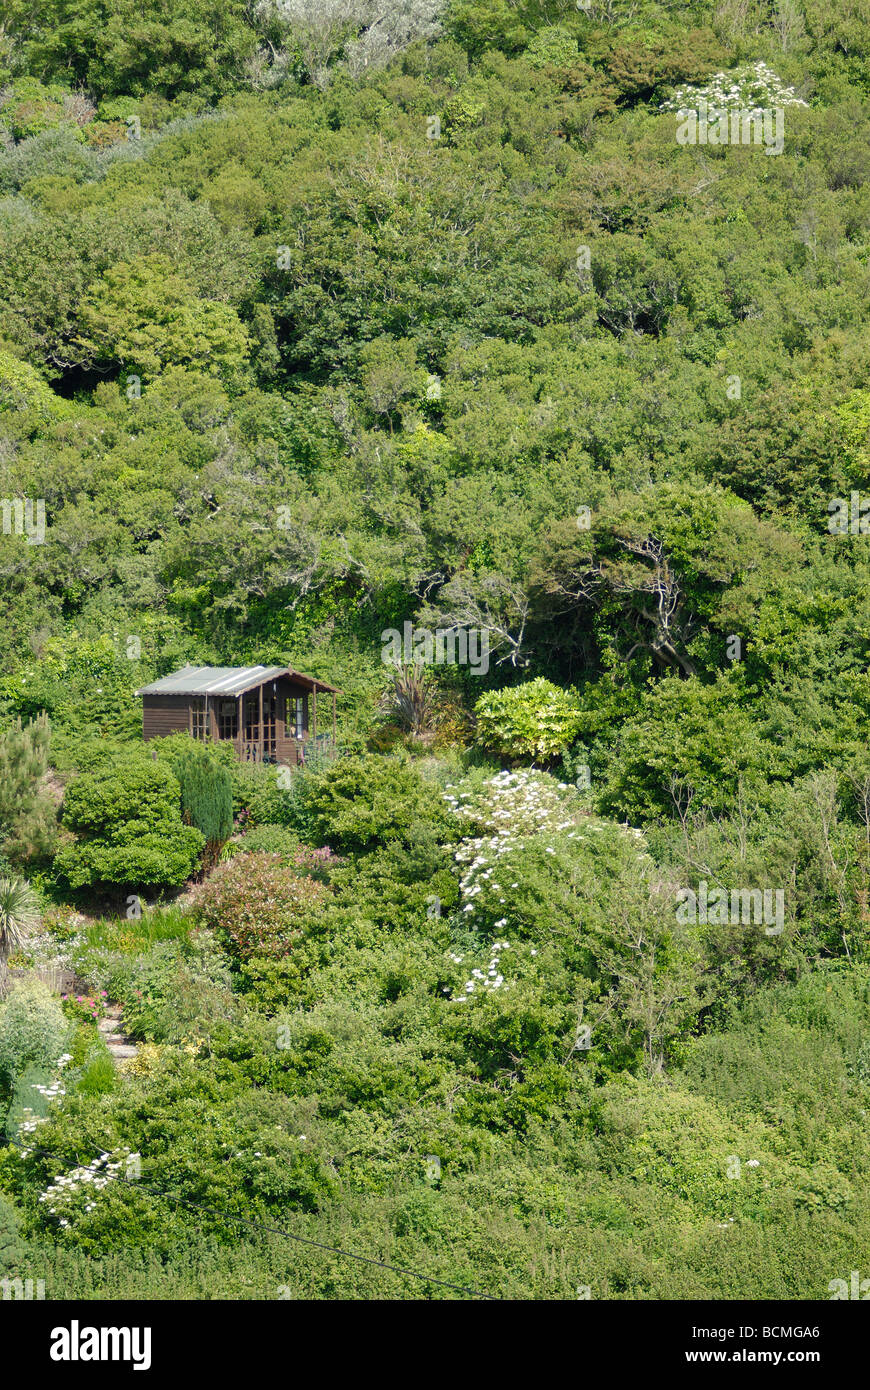 Garden shed surrounded by undergrowth Stock Photo